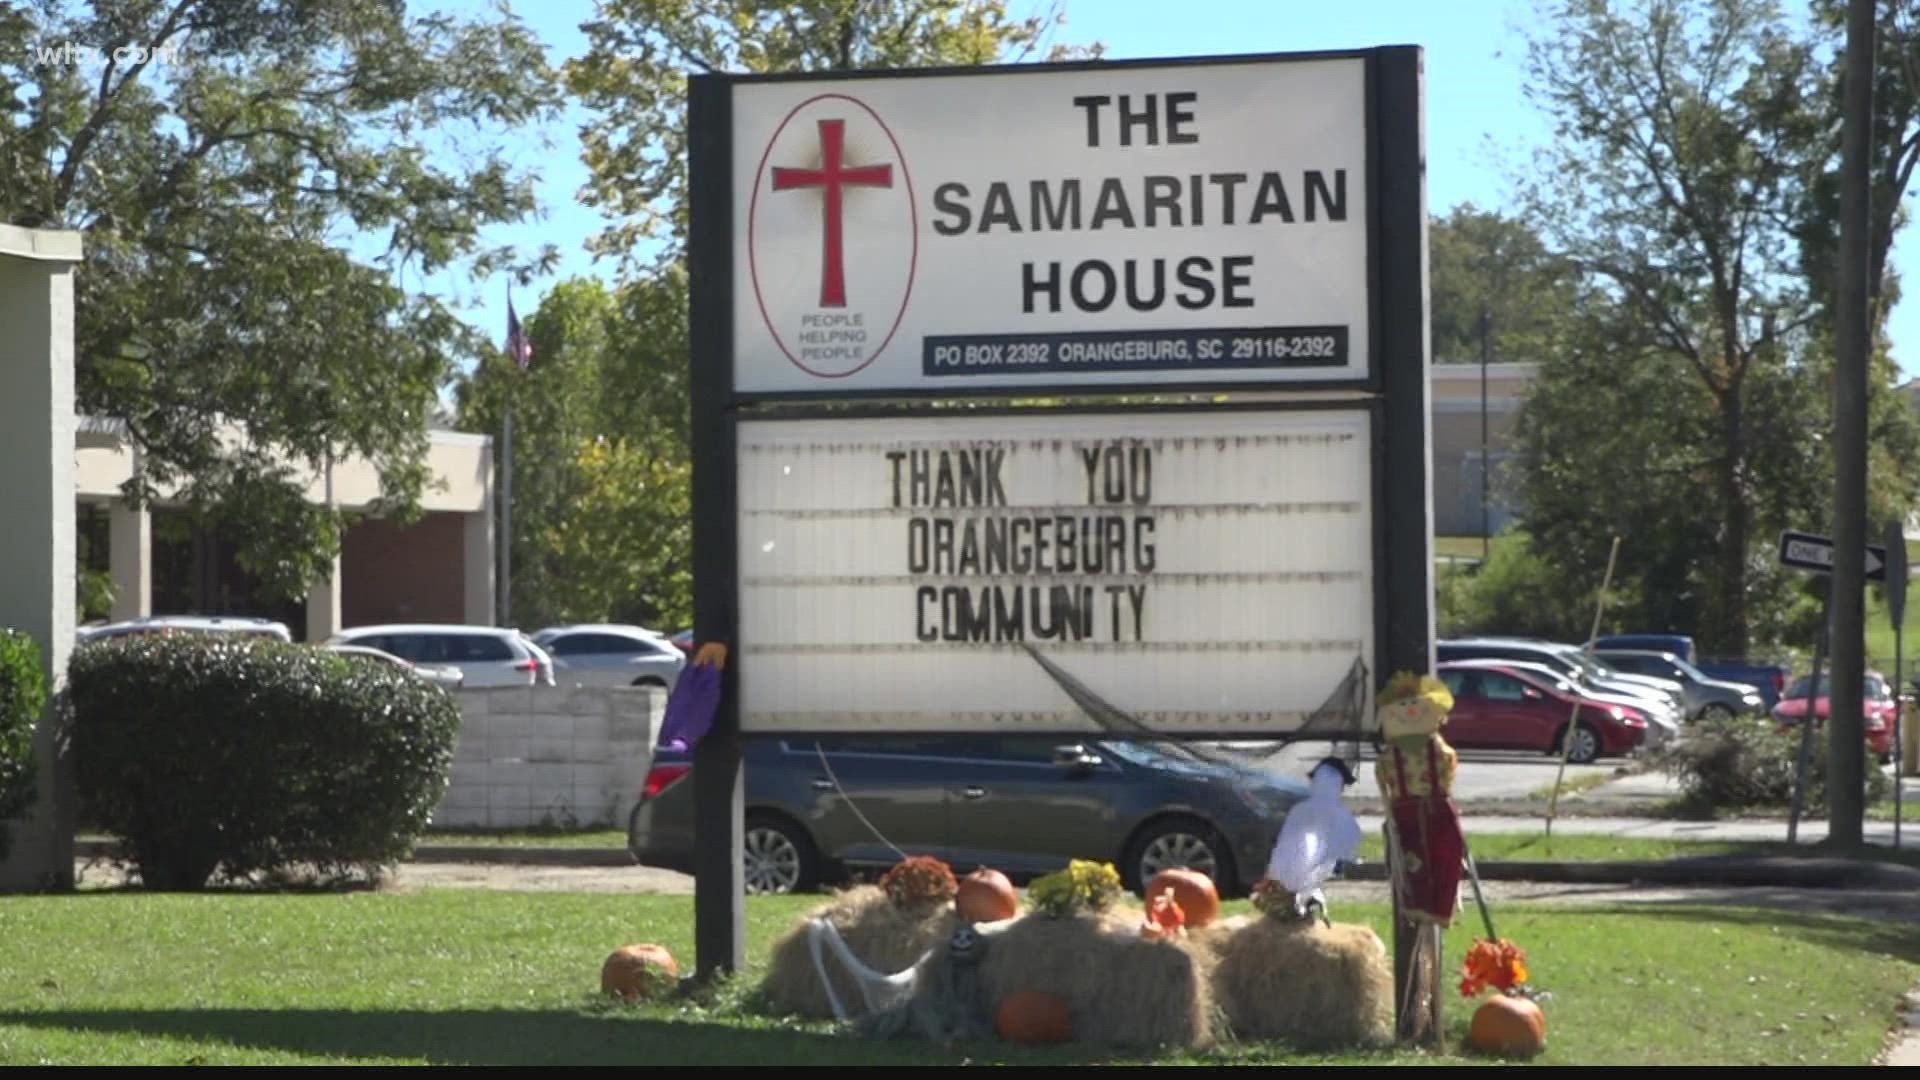 The Samaritan house in Orangeburg is hosting a series of awareness events/fundraising for next two weeks.